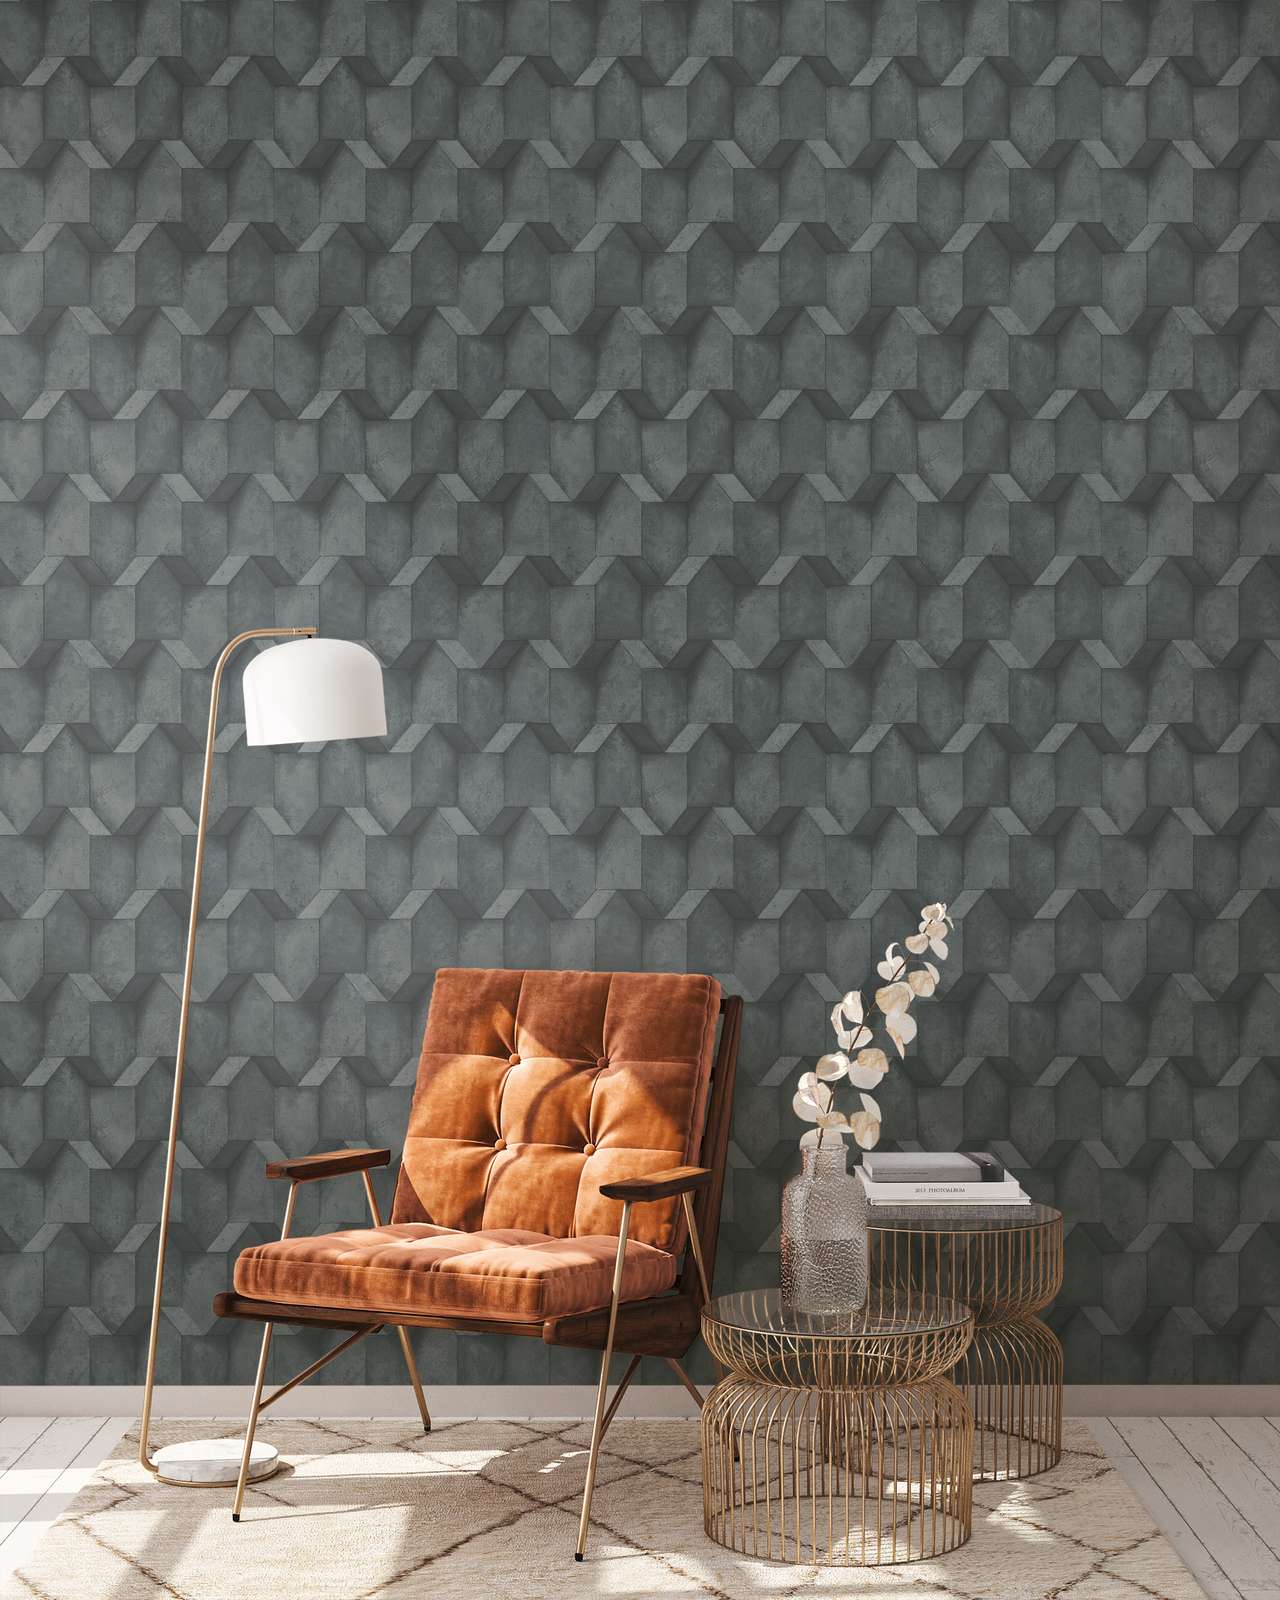             Anthracite wallpaper with 3D concrete look - black, grey
        